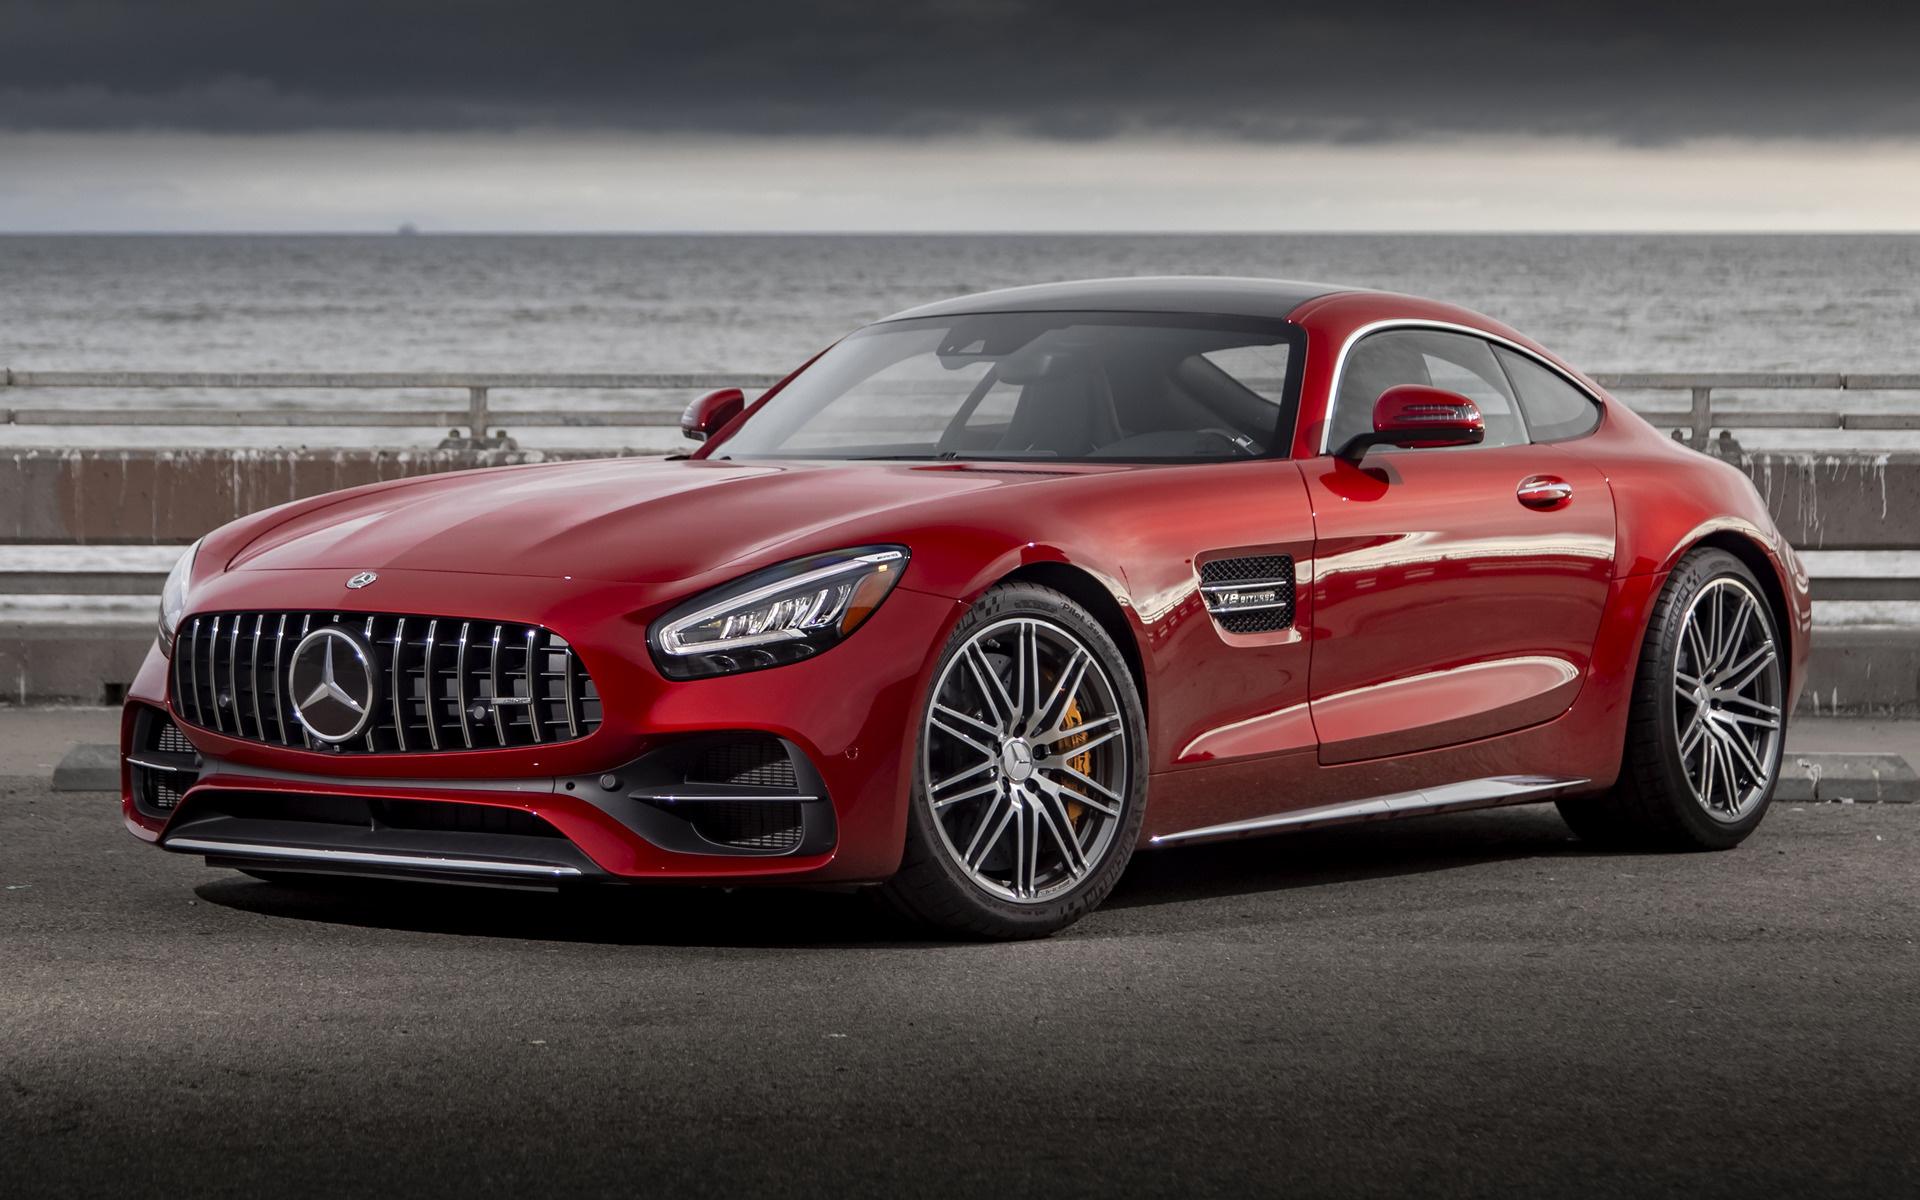 Mercedes AMG GT C (US) And HD Image